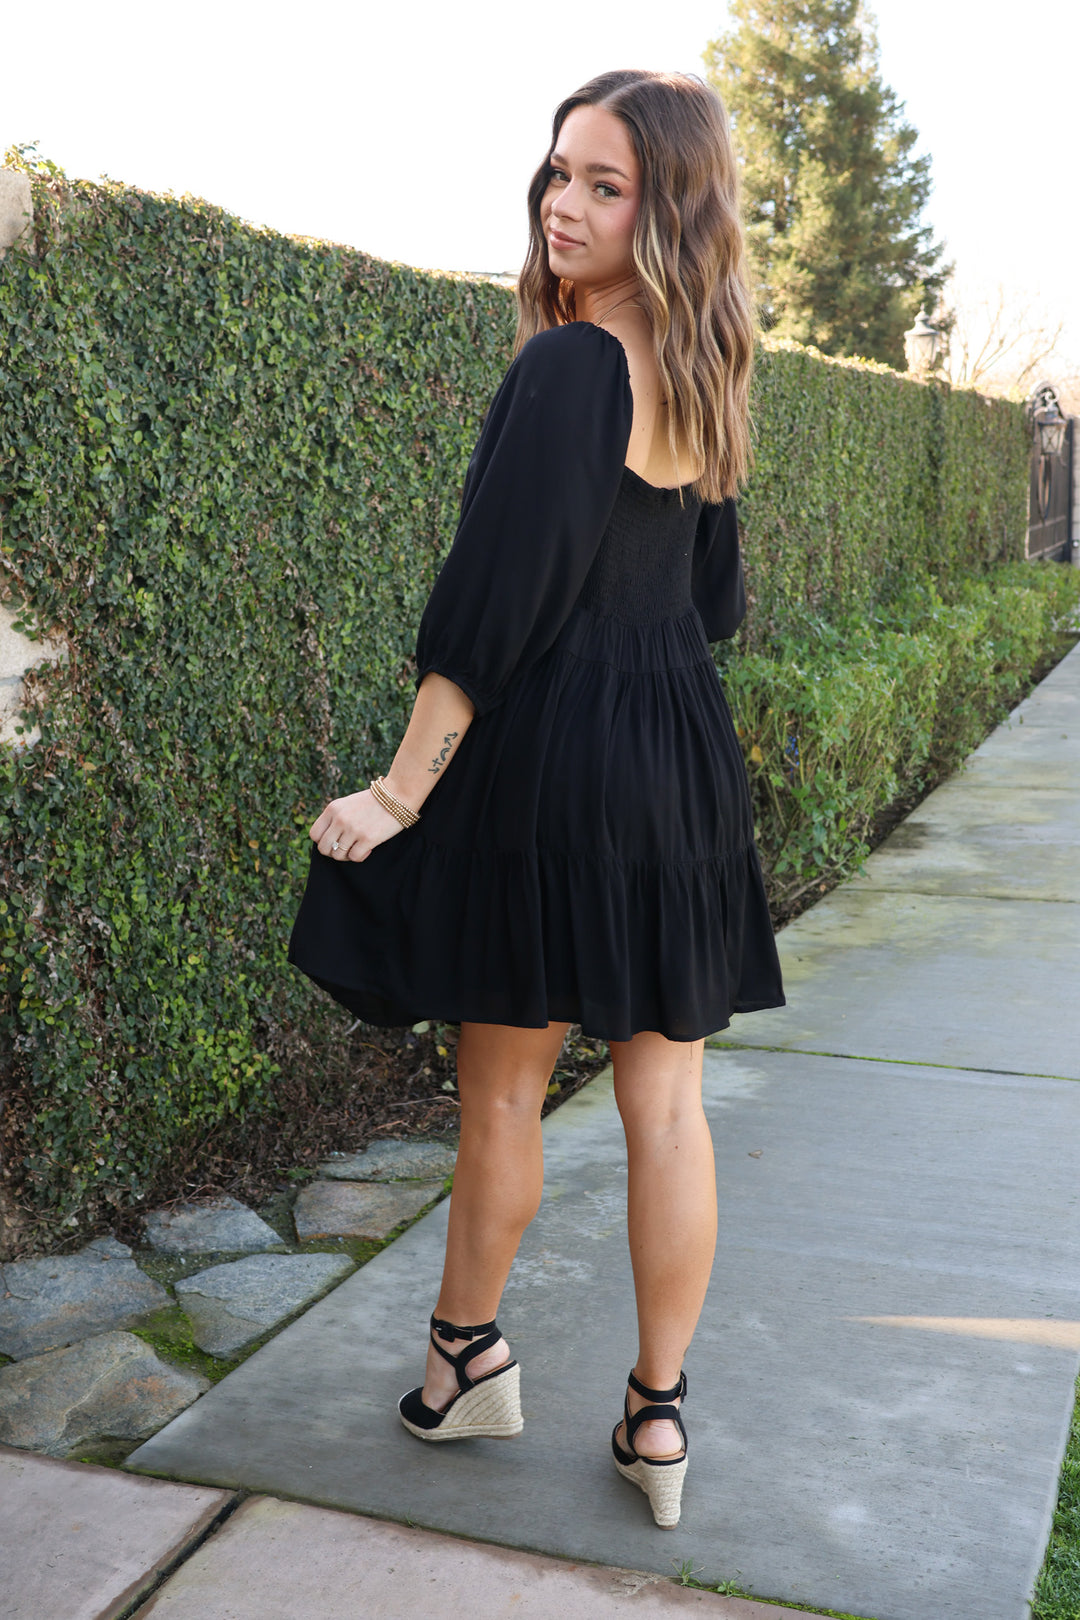 Plan For The Best Dress In Black - ShopSpoiled